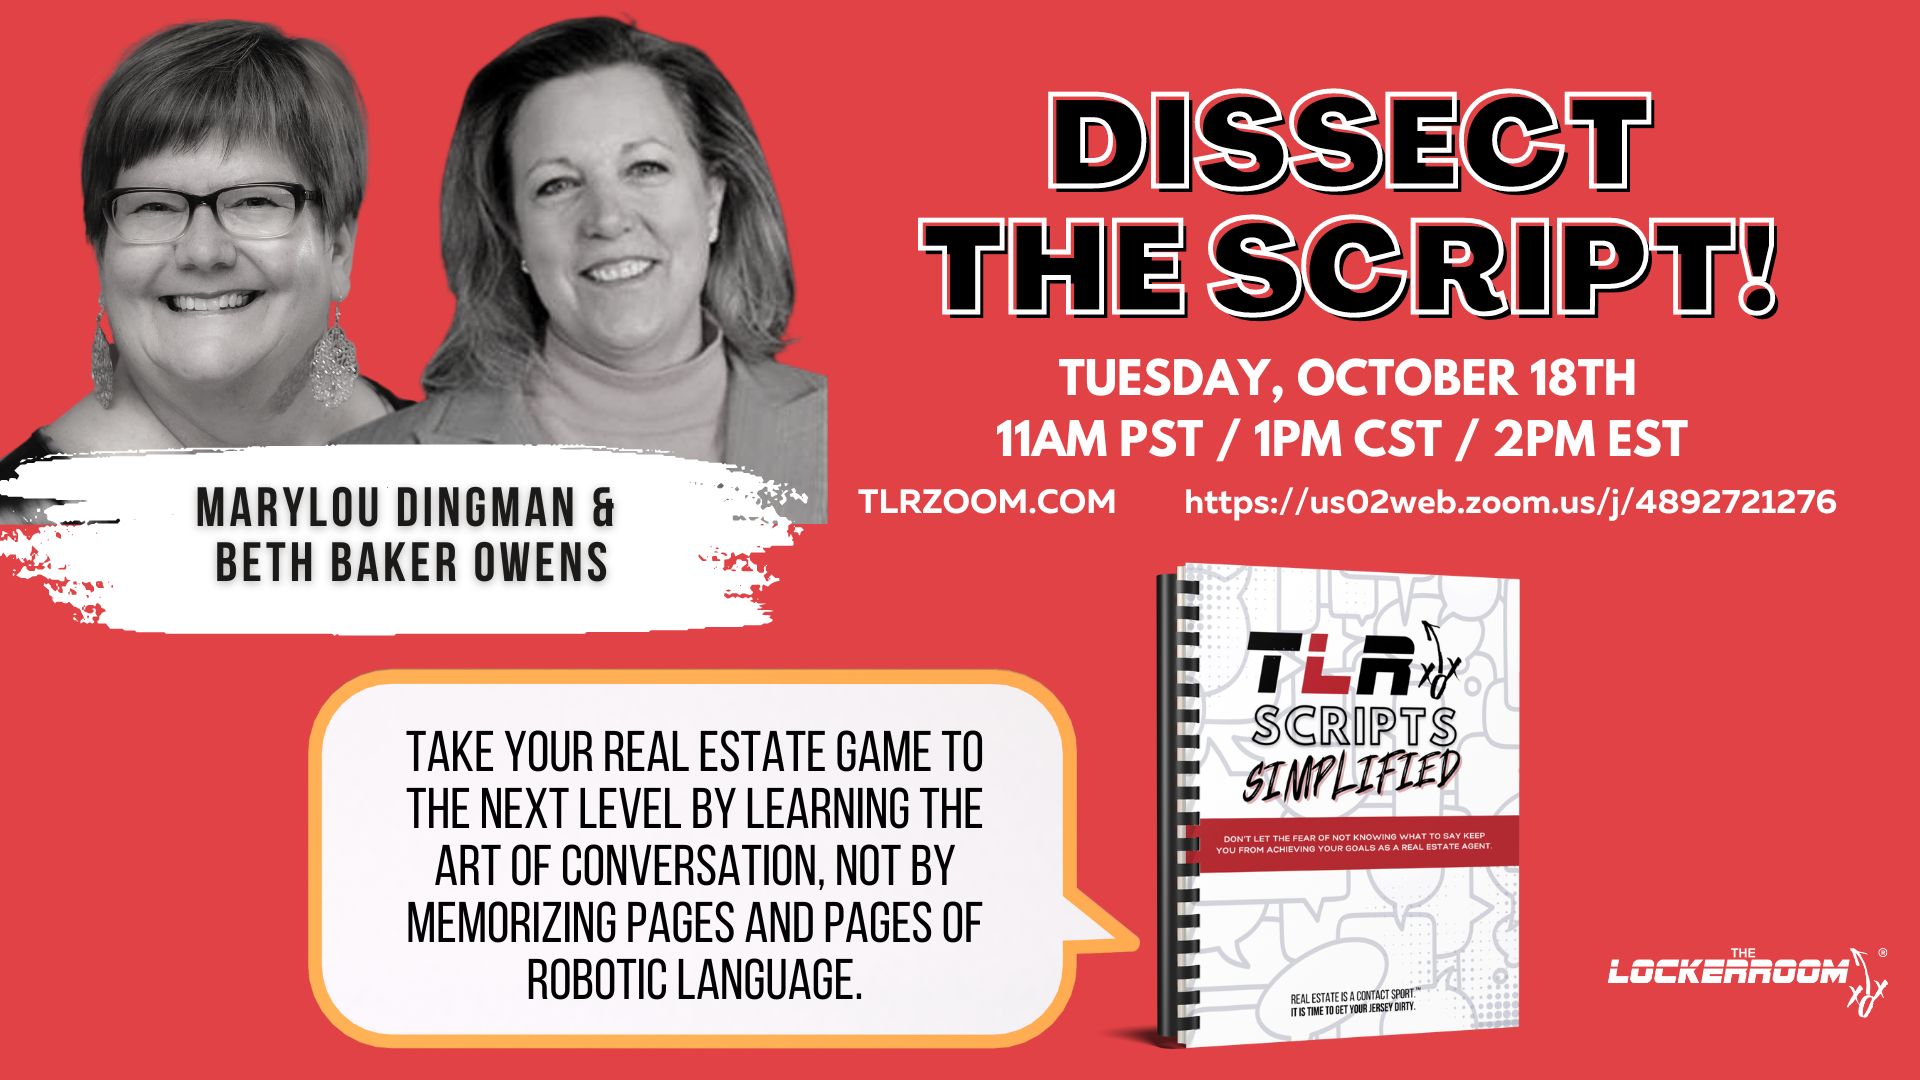 
TLR: DISSECT THE SCRIPT! AGENT EDITION